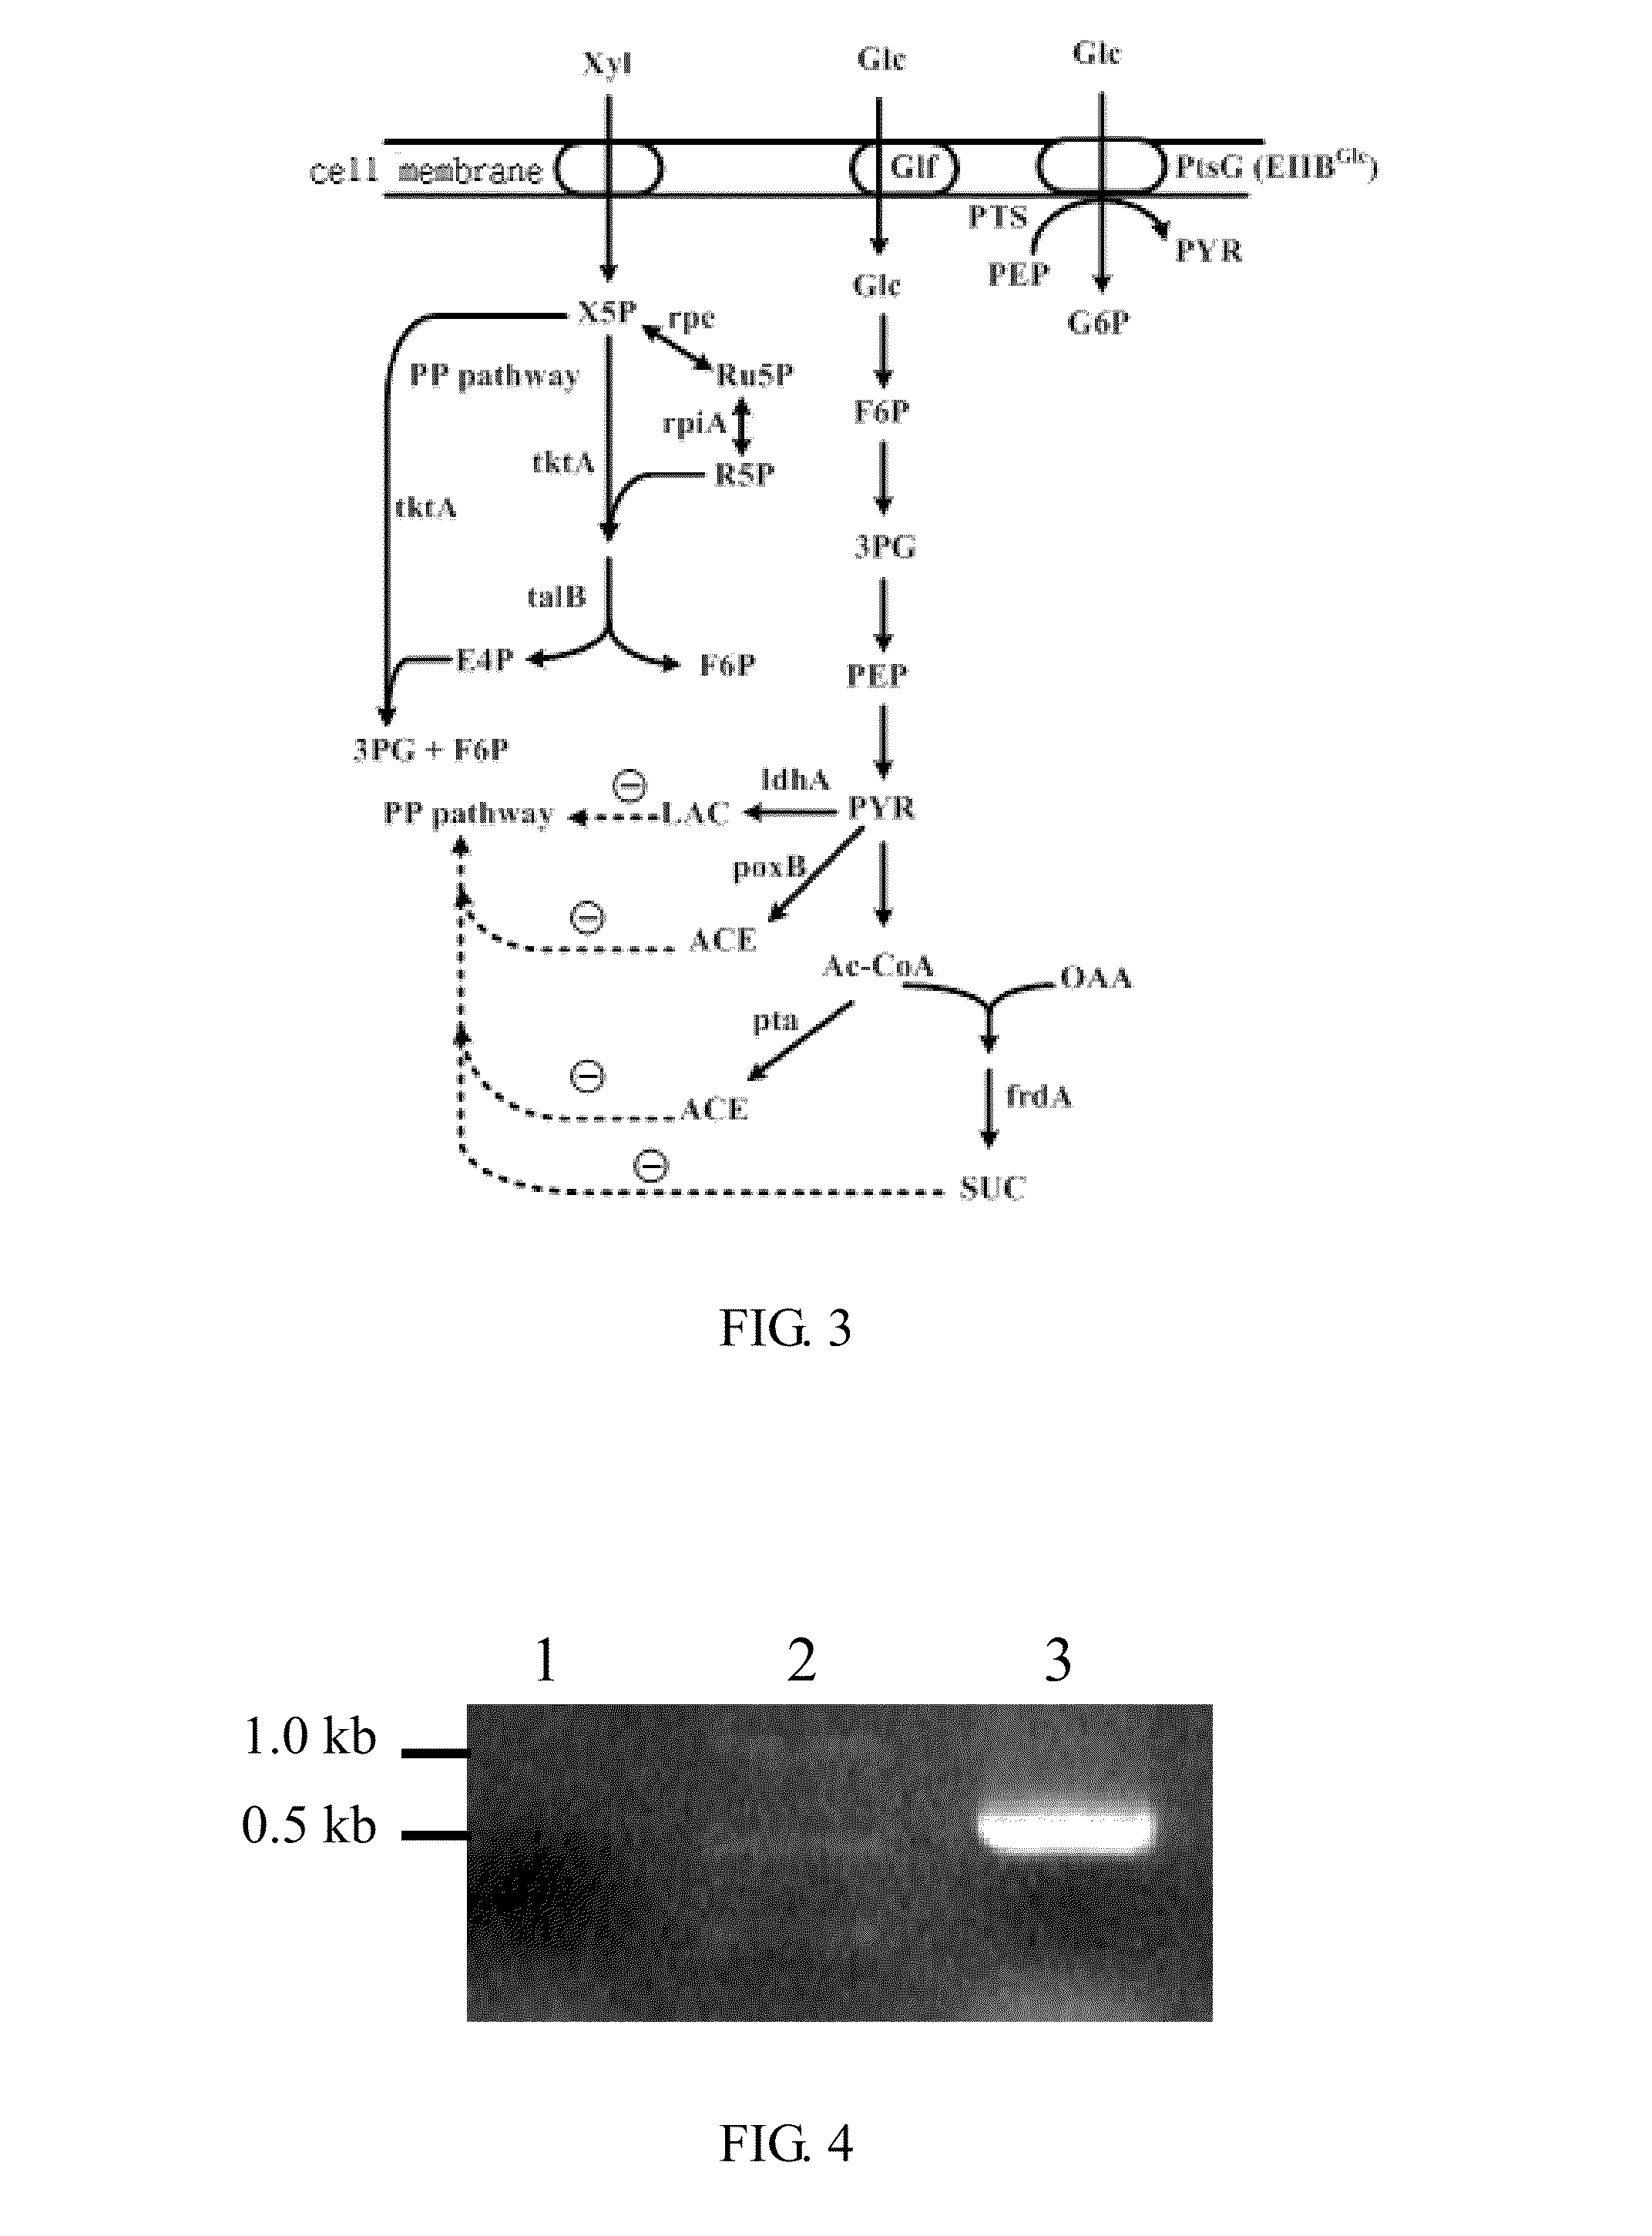 Method for Simultaneous Fermentation of Pentose and Hexose